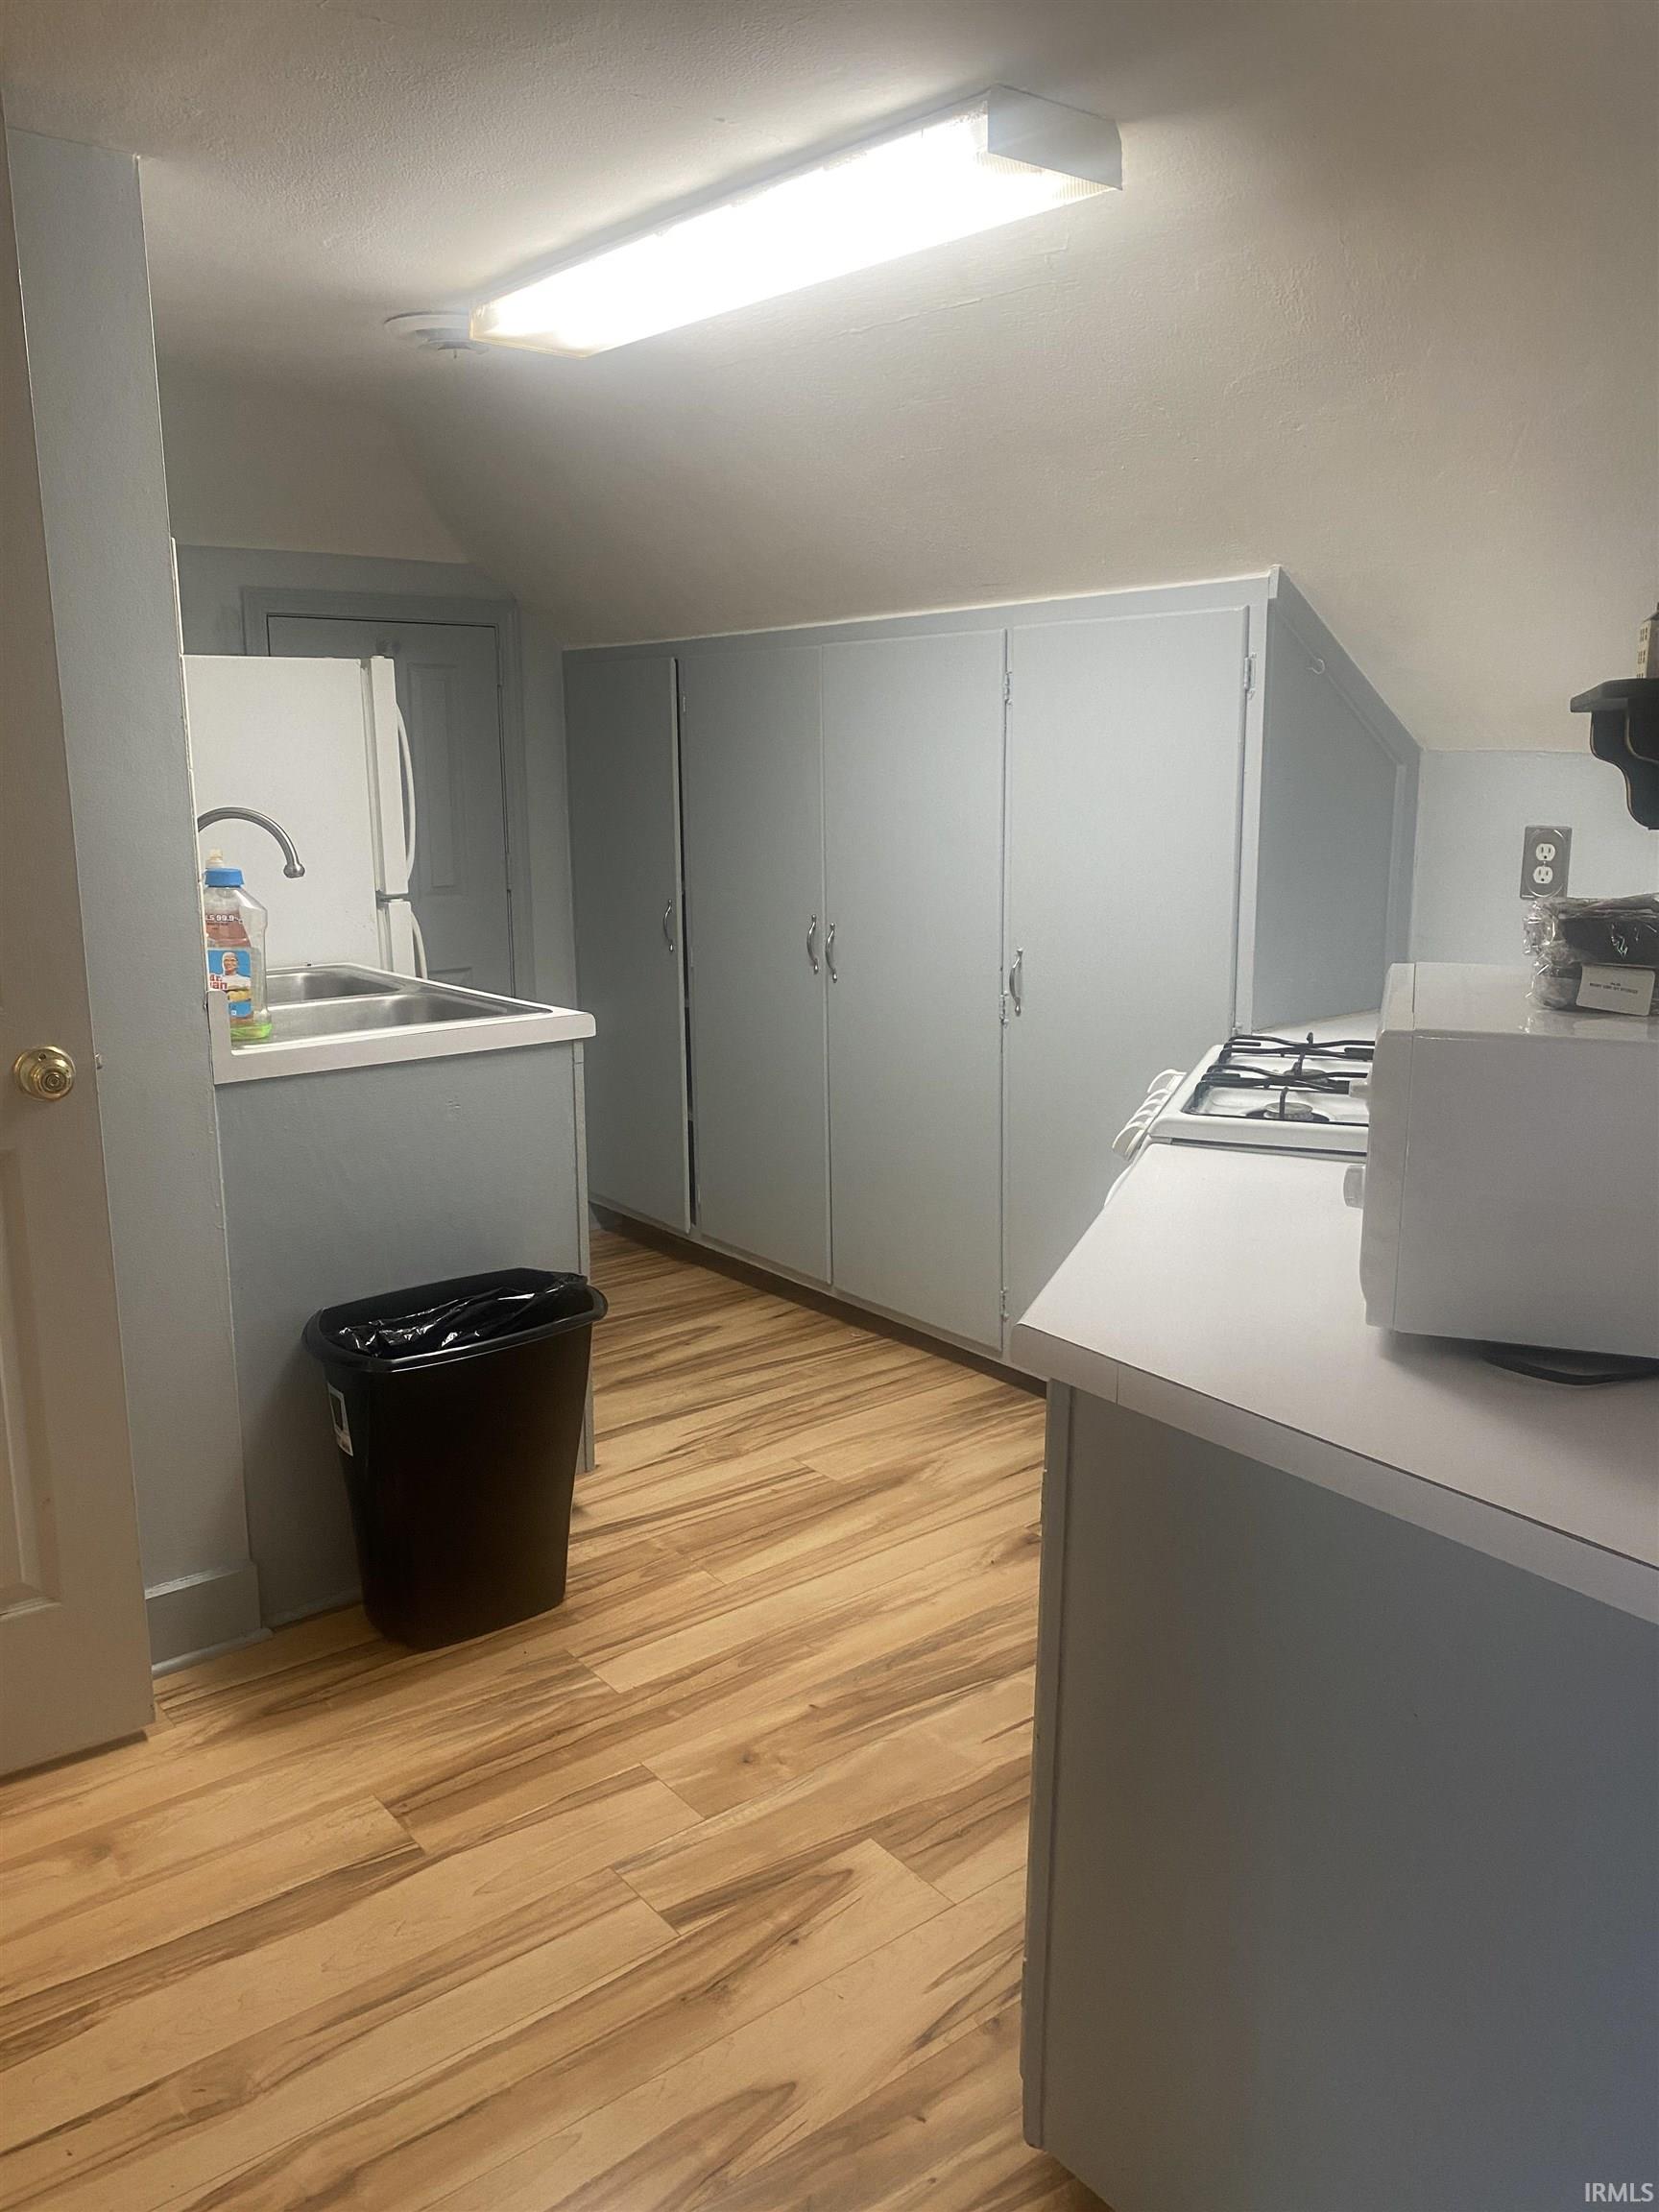 Upstairs, two bedroom apartment kitchen.